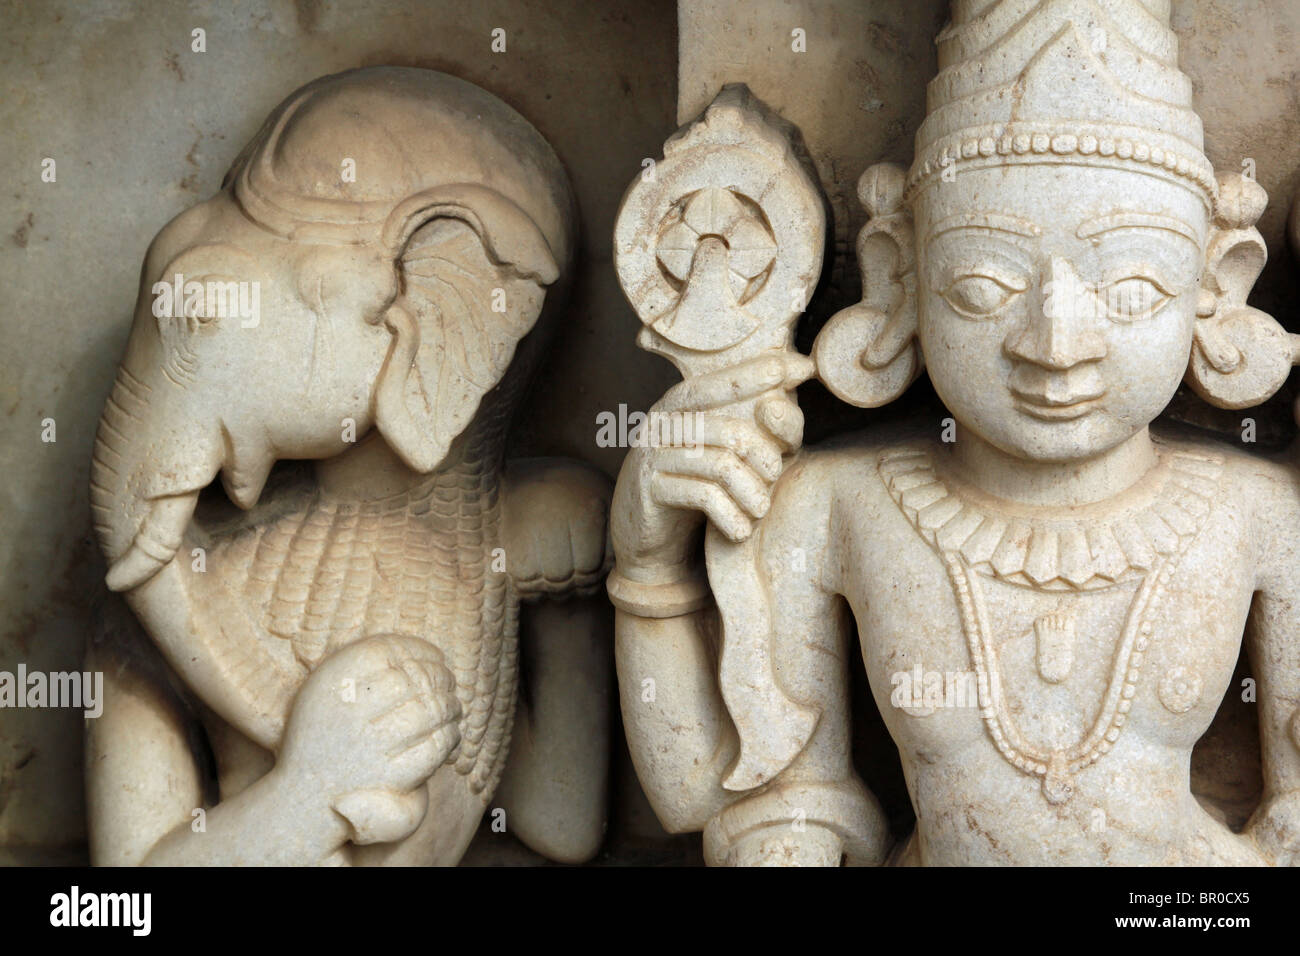 Ancient white stone sculptures of Ganesha and Krishna decorating a Hindu temple in Udaipur, Rajasthan, India. Stock Photo